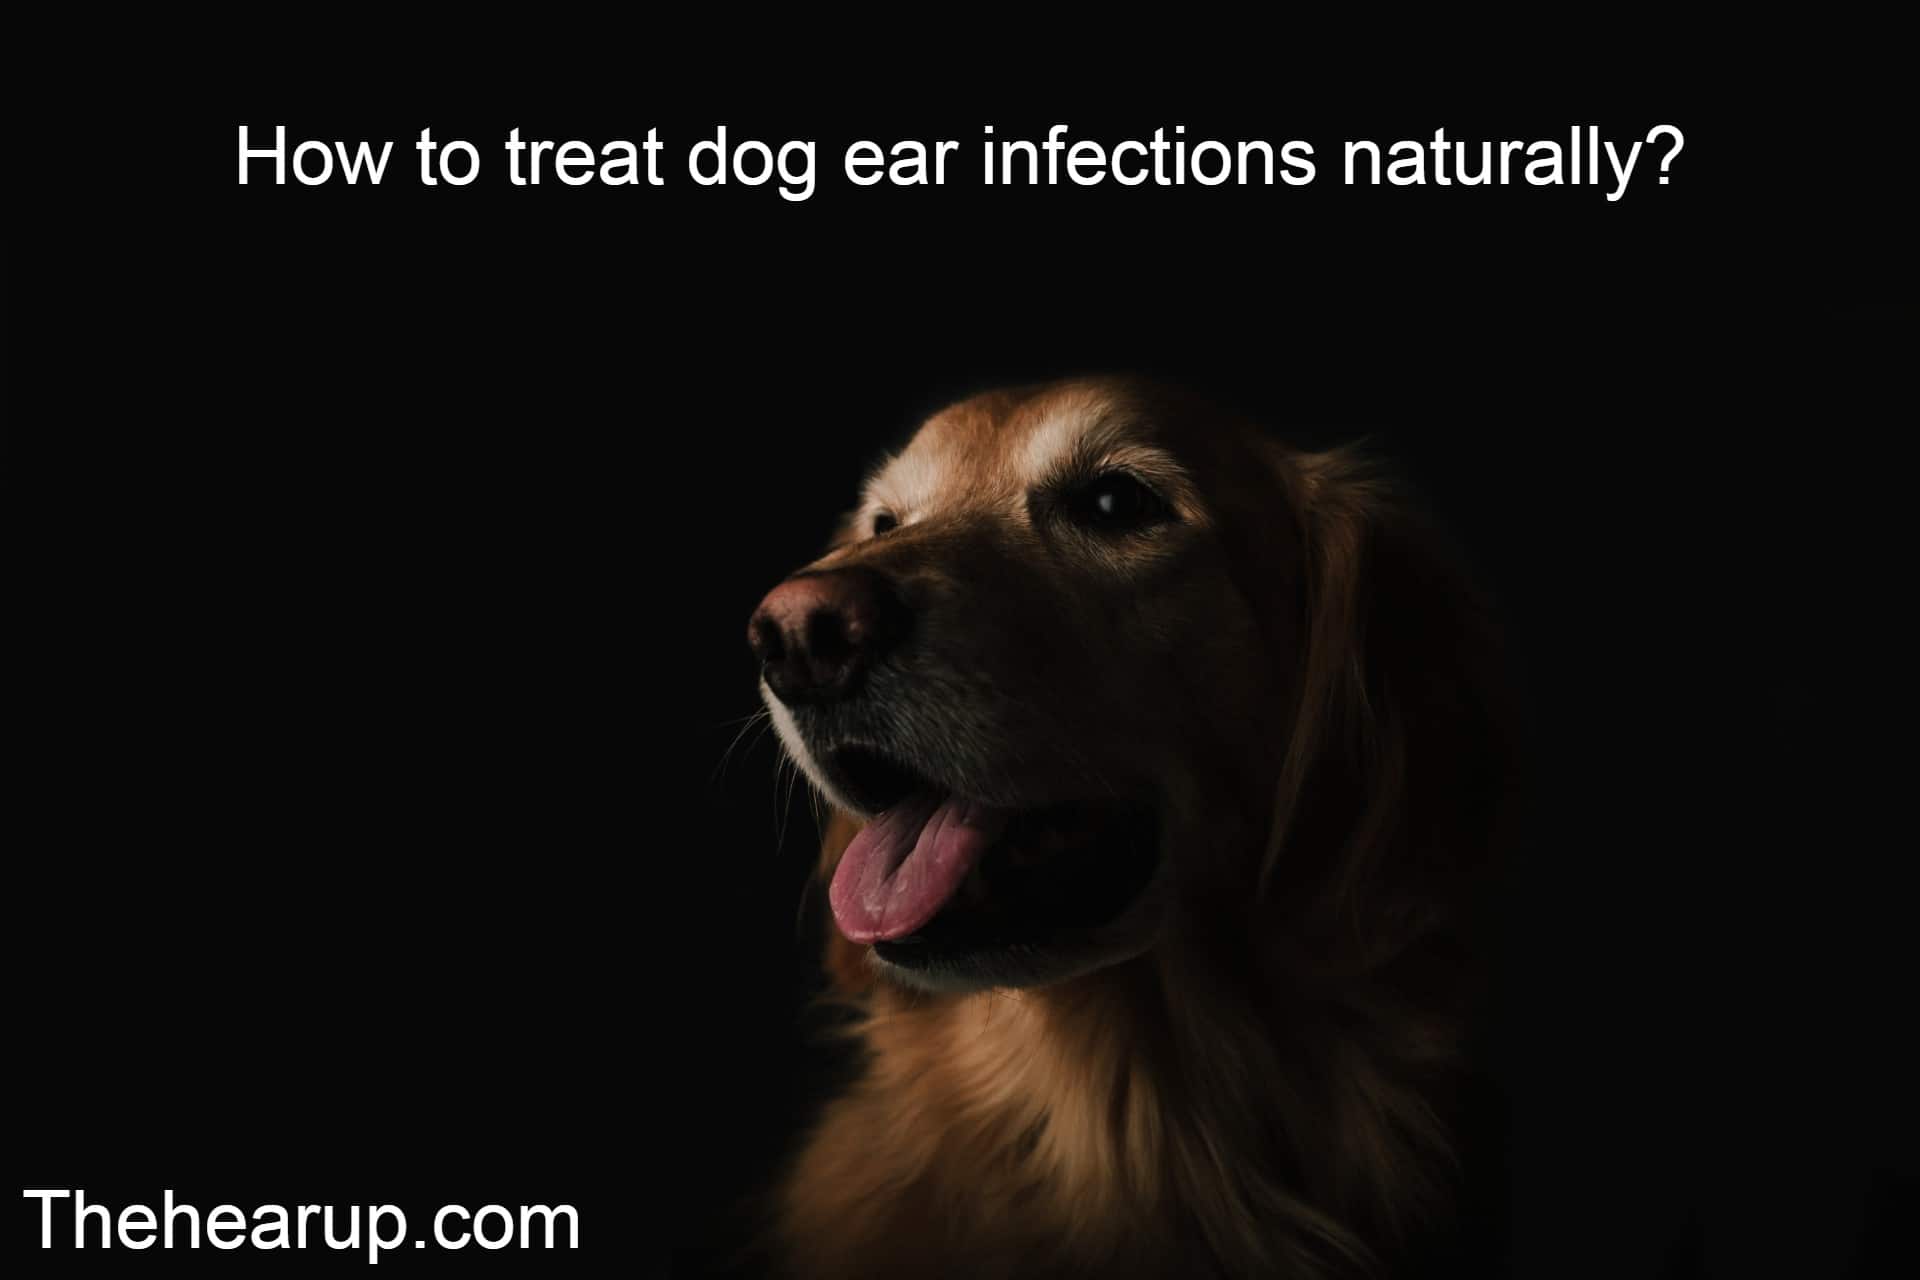 How to treat dog ear infections naturally